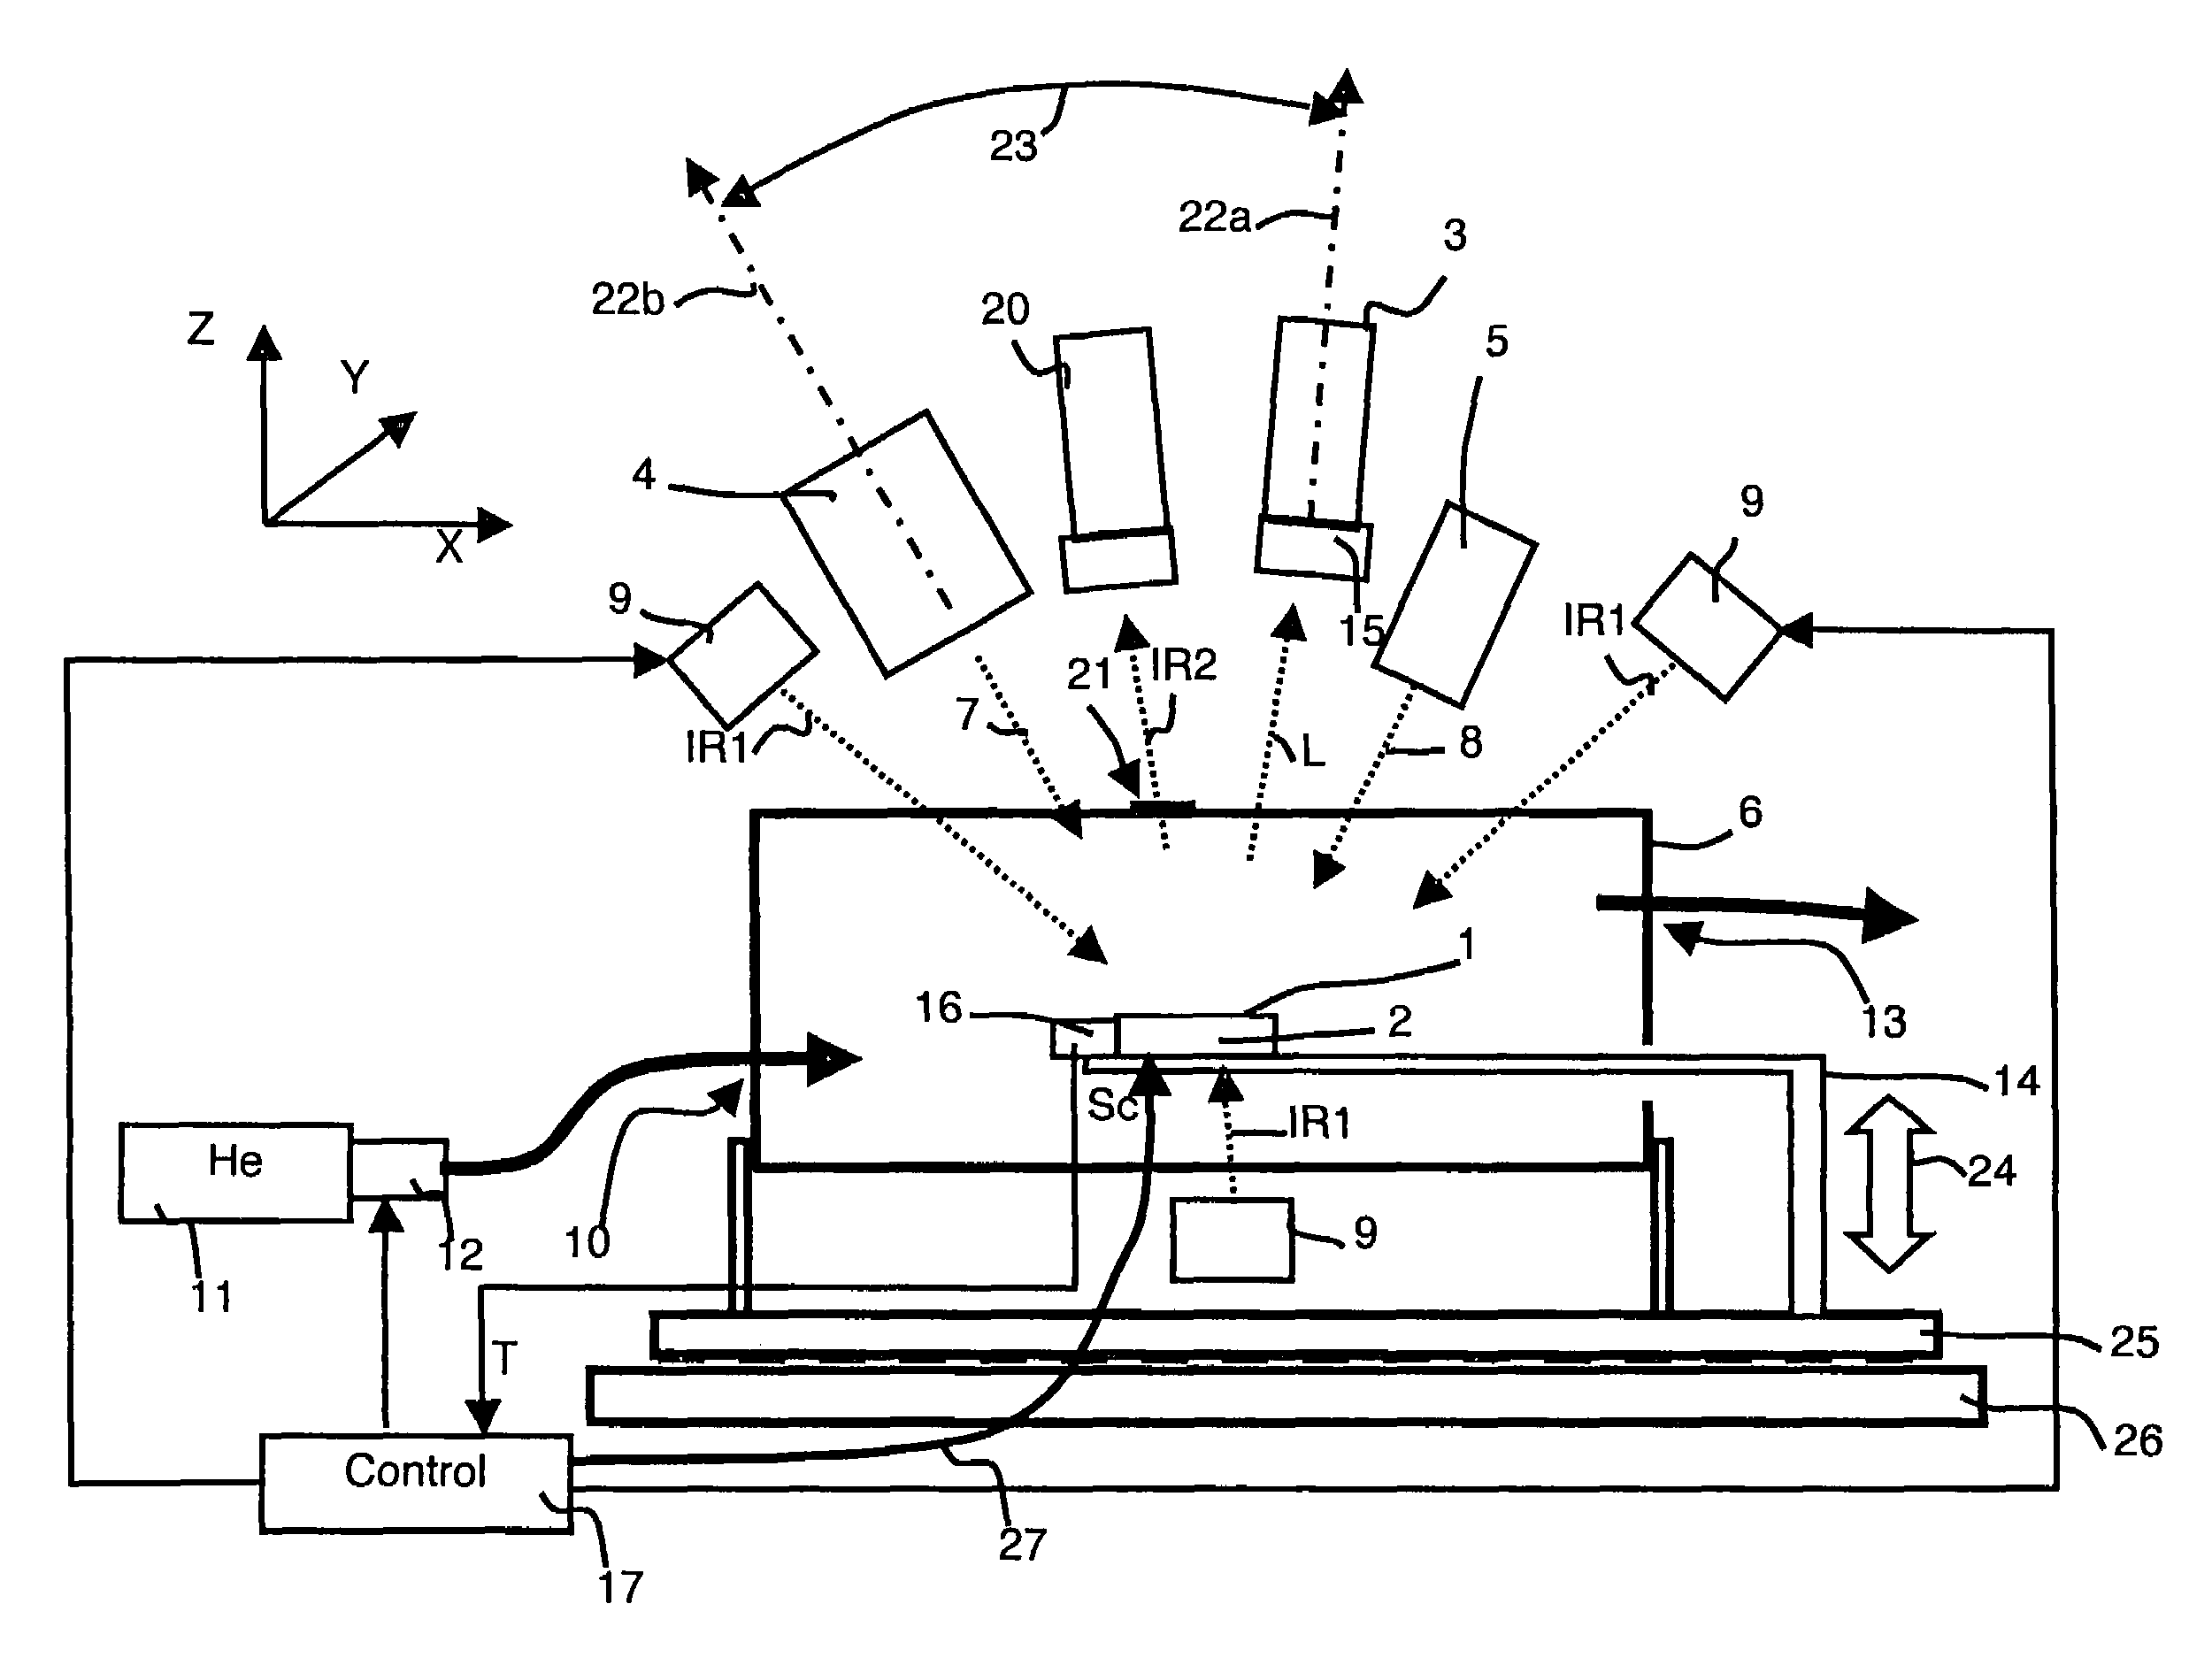 Surface strain measuring device